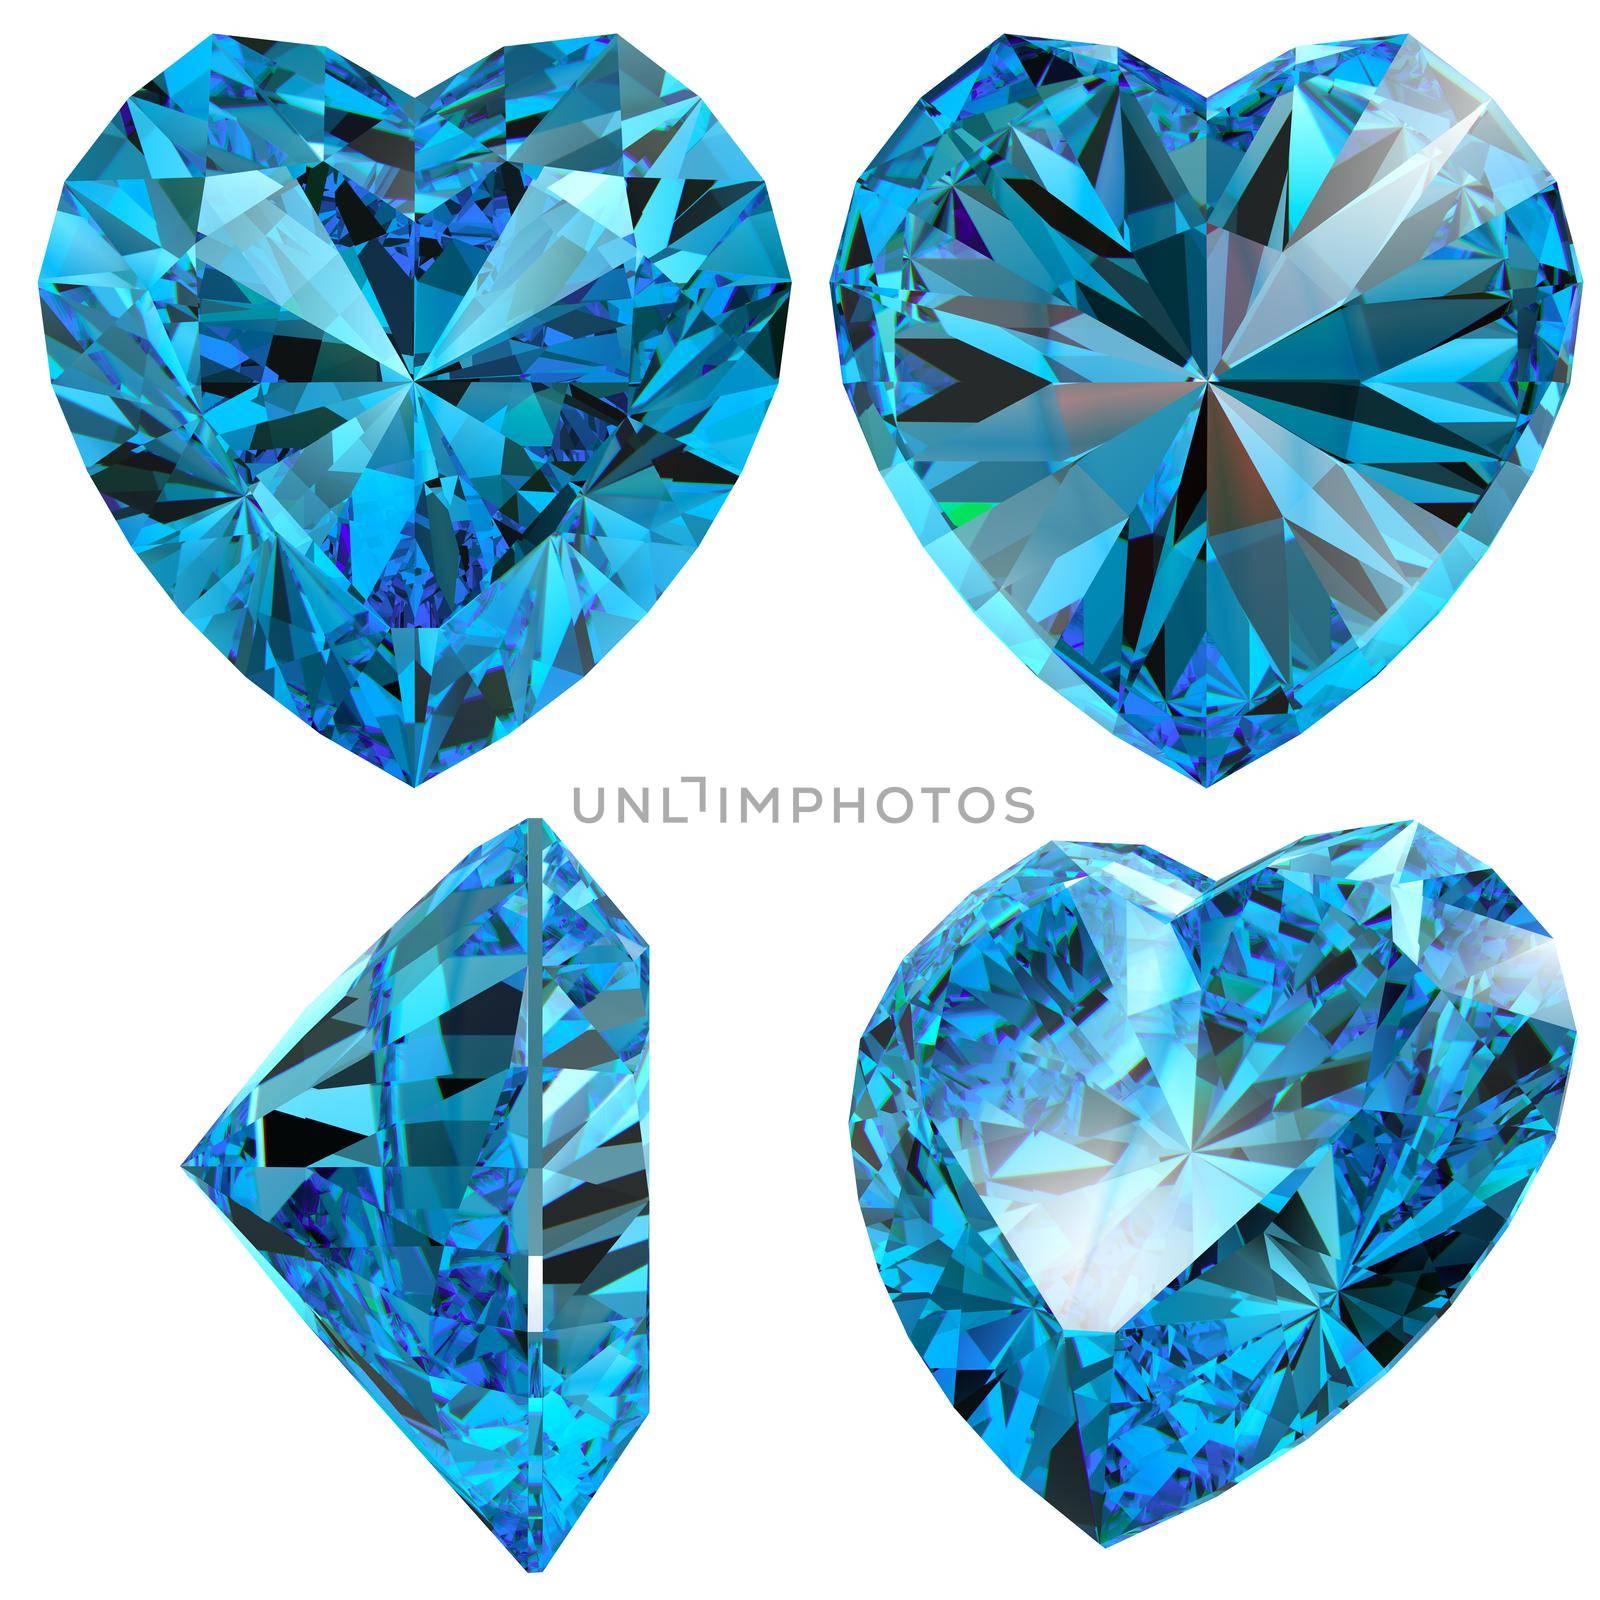 Blue heart diamond cut gem isolated by rivertime